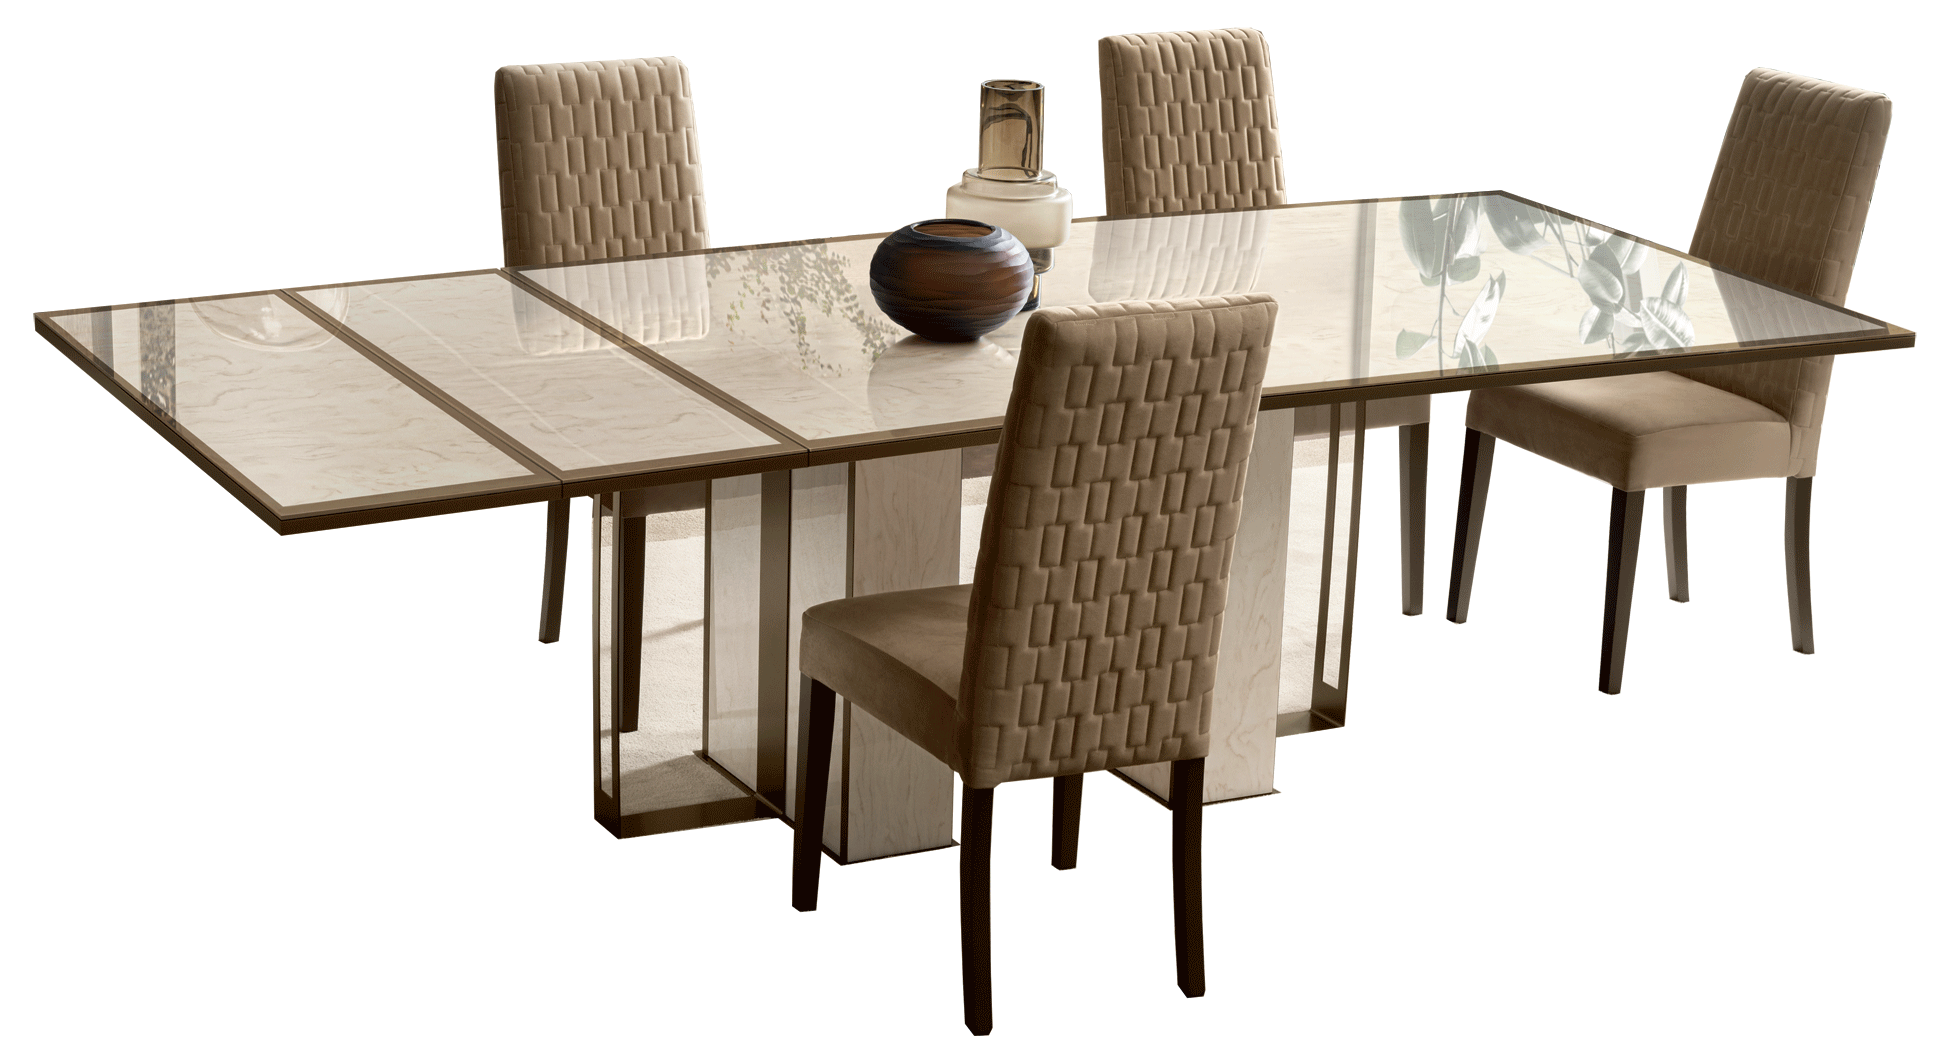 Brands Garcia Laurel & Hardy Tables Poesia Dining Table